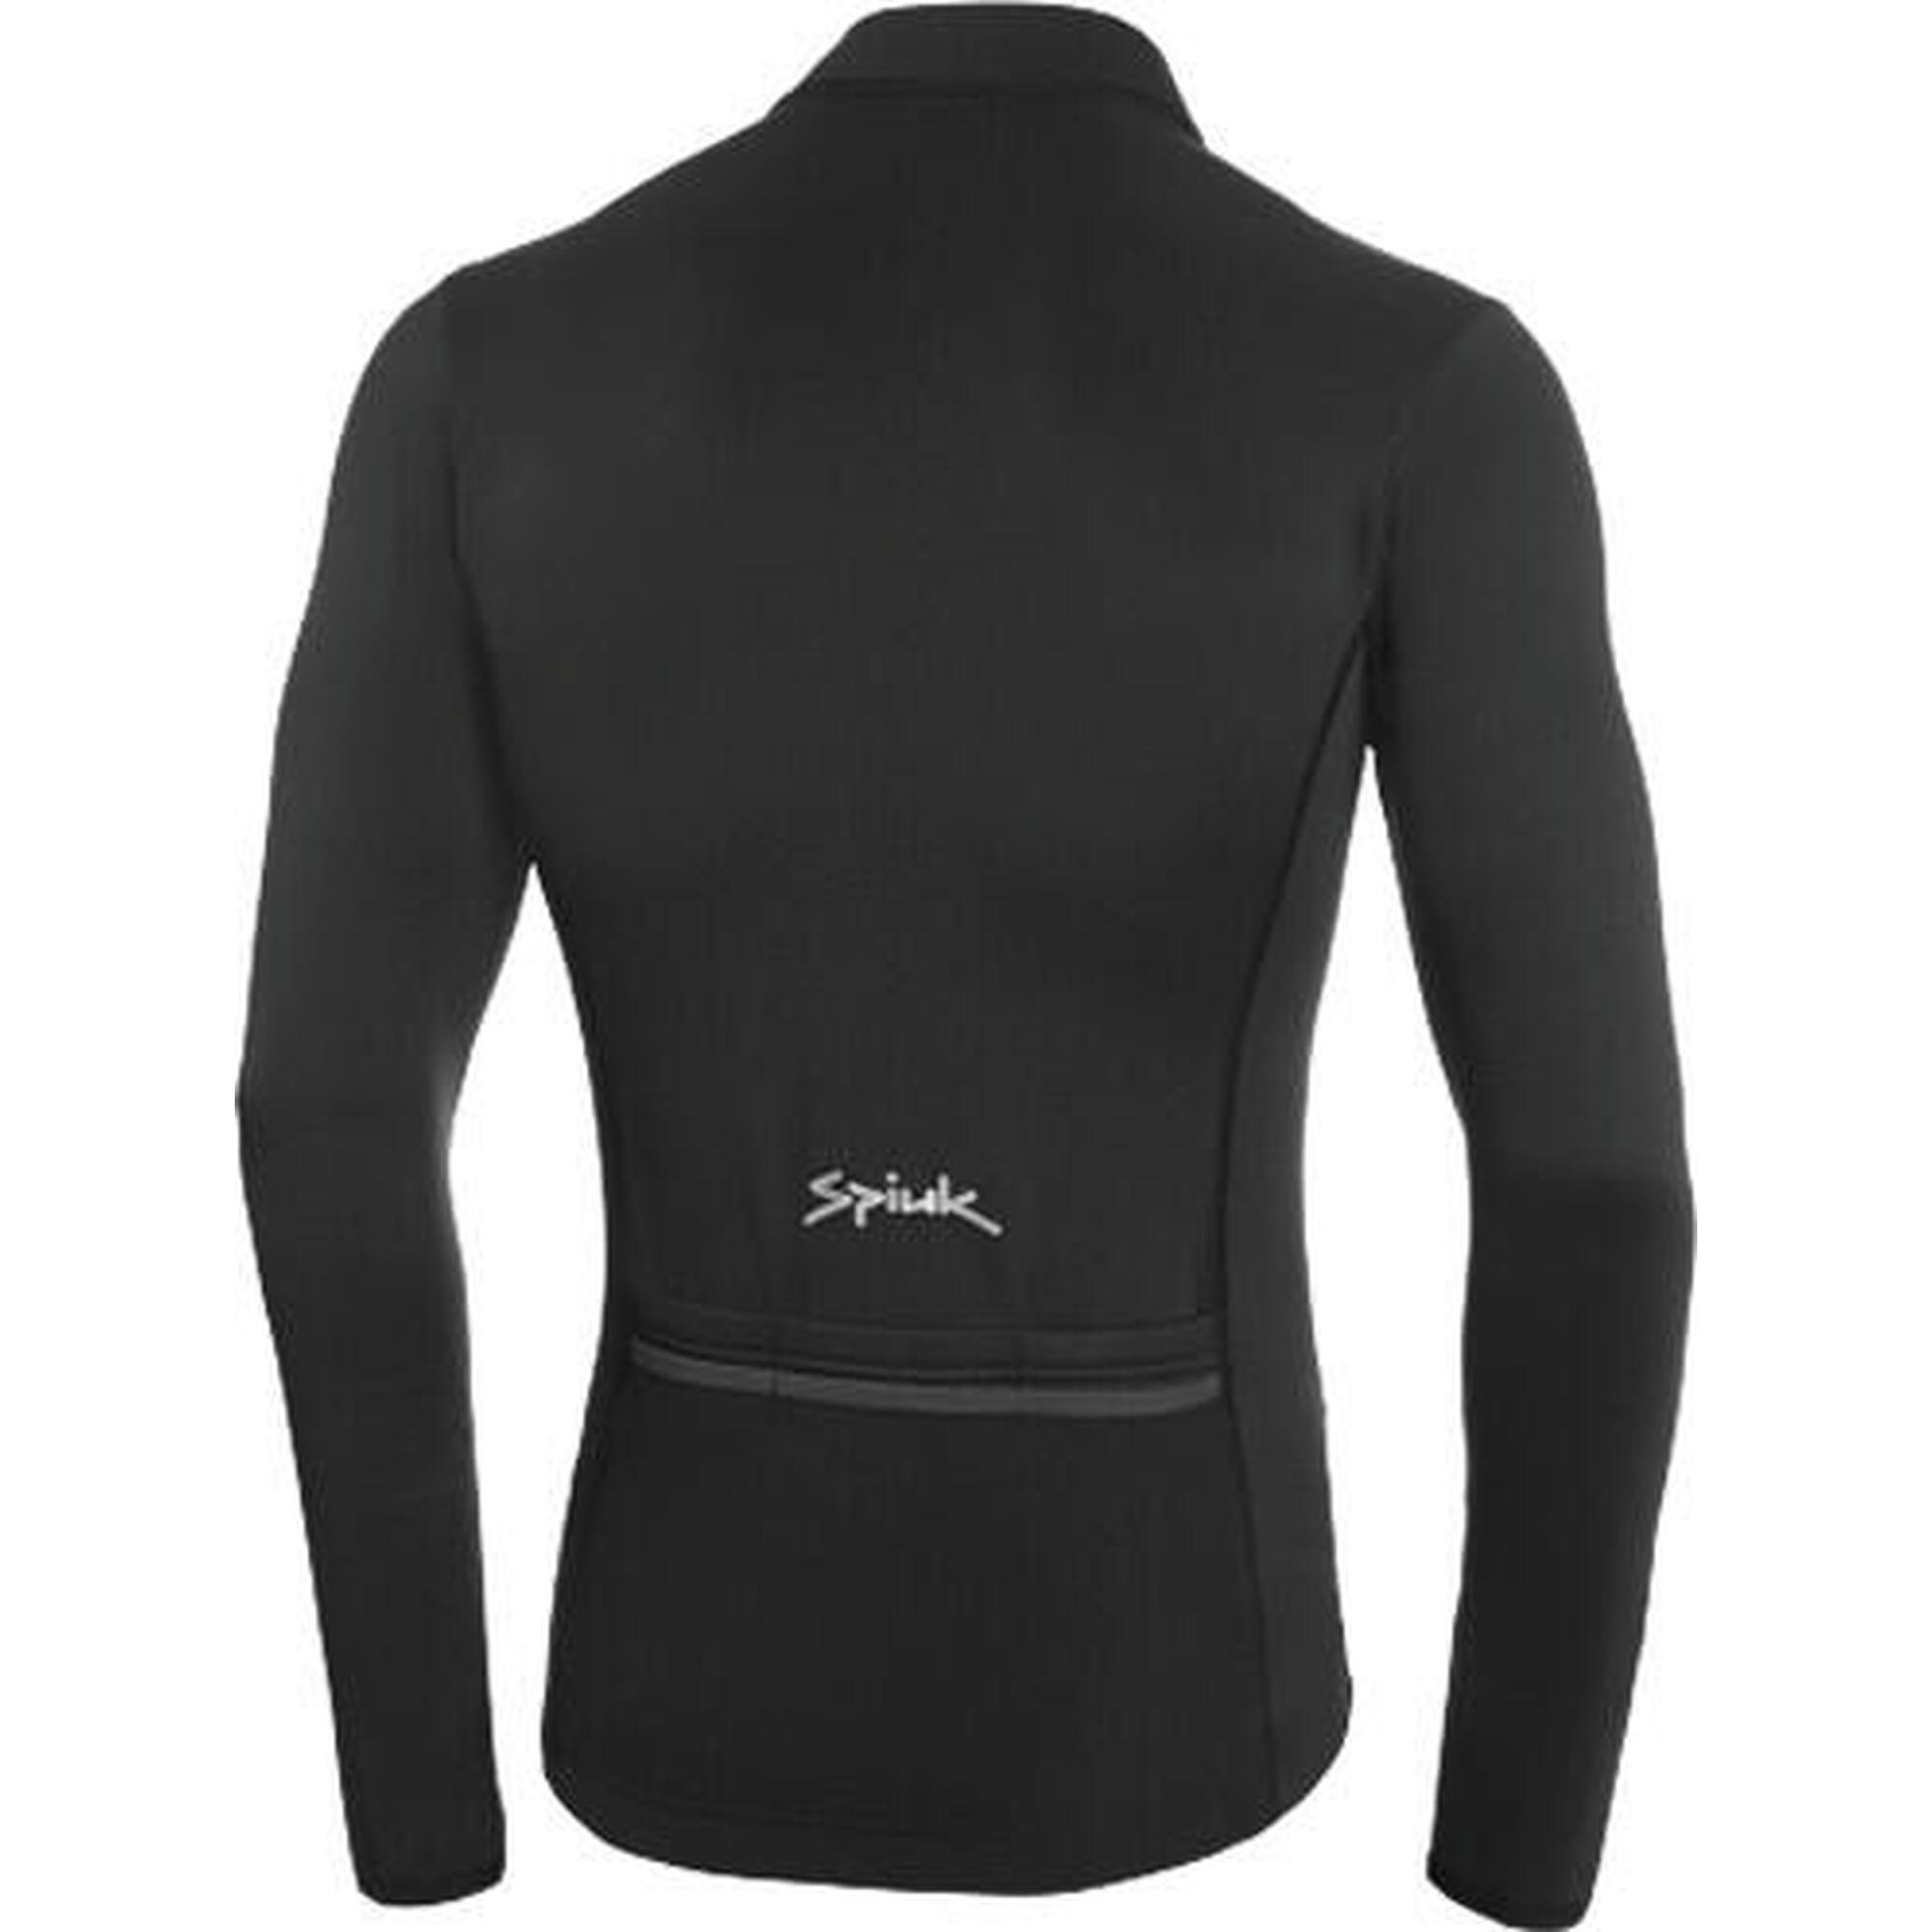 Maillot manches longues Spiuk Anatomic